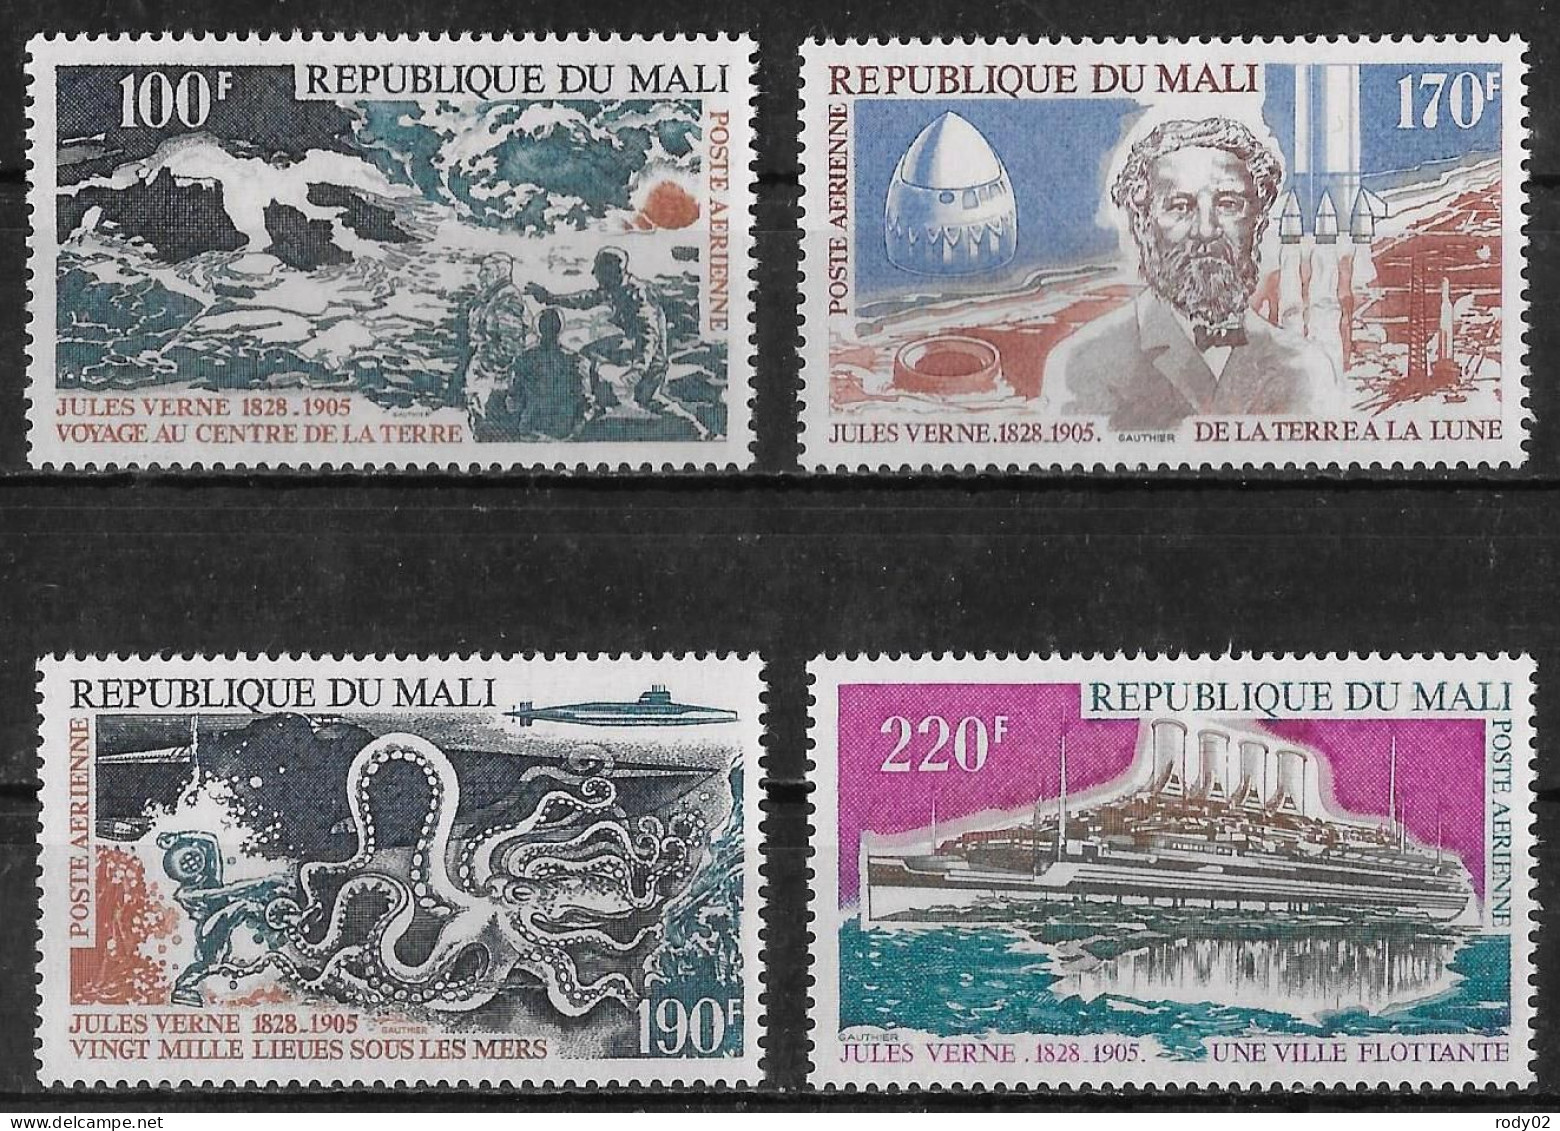 MALI - OEUVRES DE JULES VERNE - PA 239 A 242 - NEUF** MNH - Ecrivains